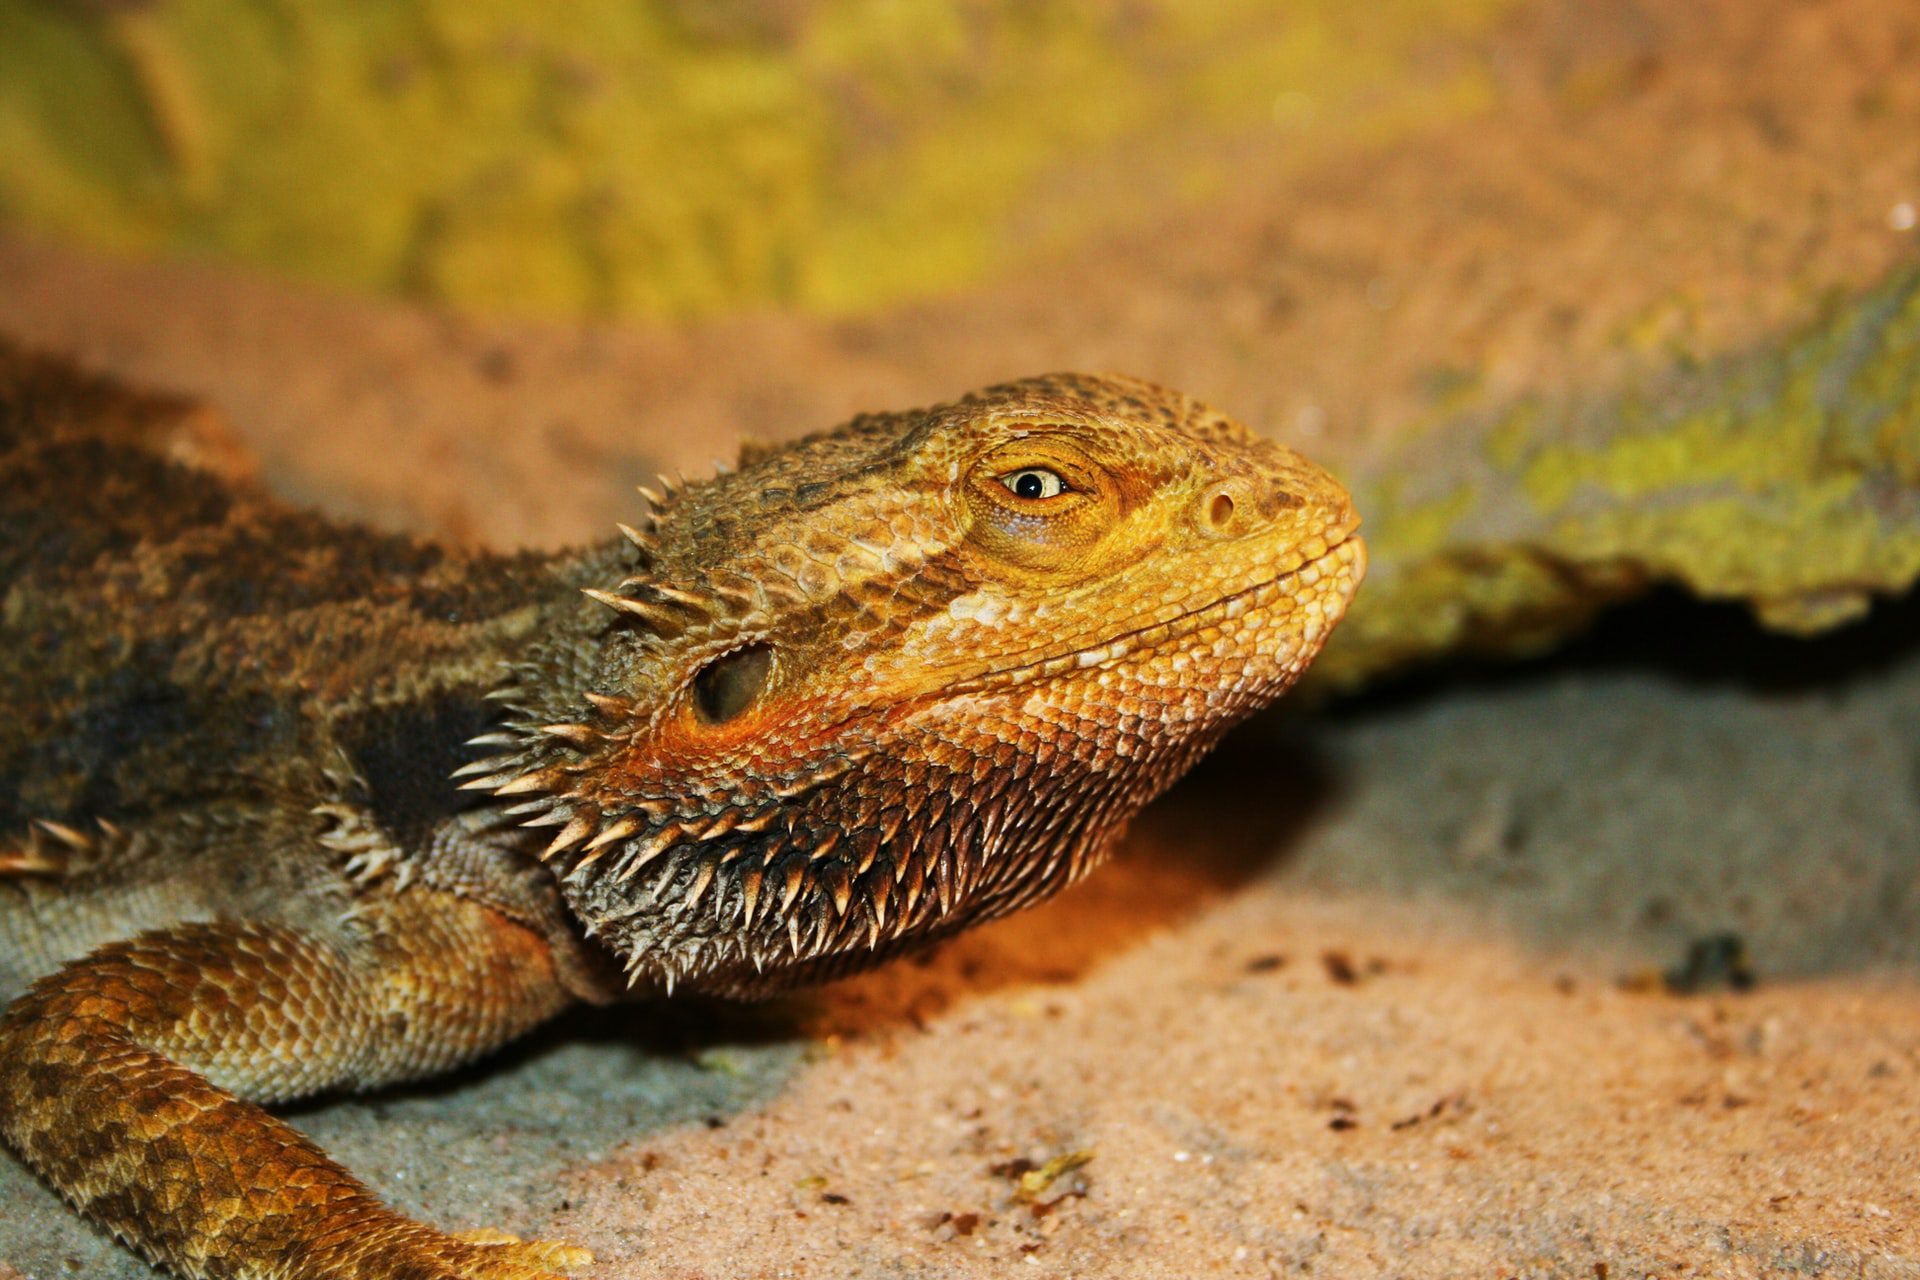 Top Five Most Common Types Of Pet Lizards Pets And Animals Tips